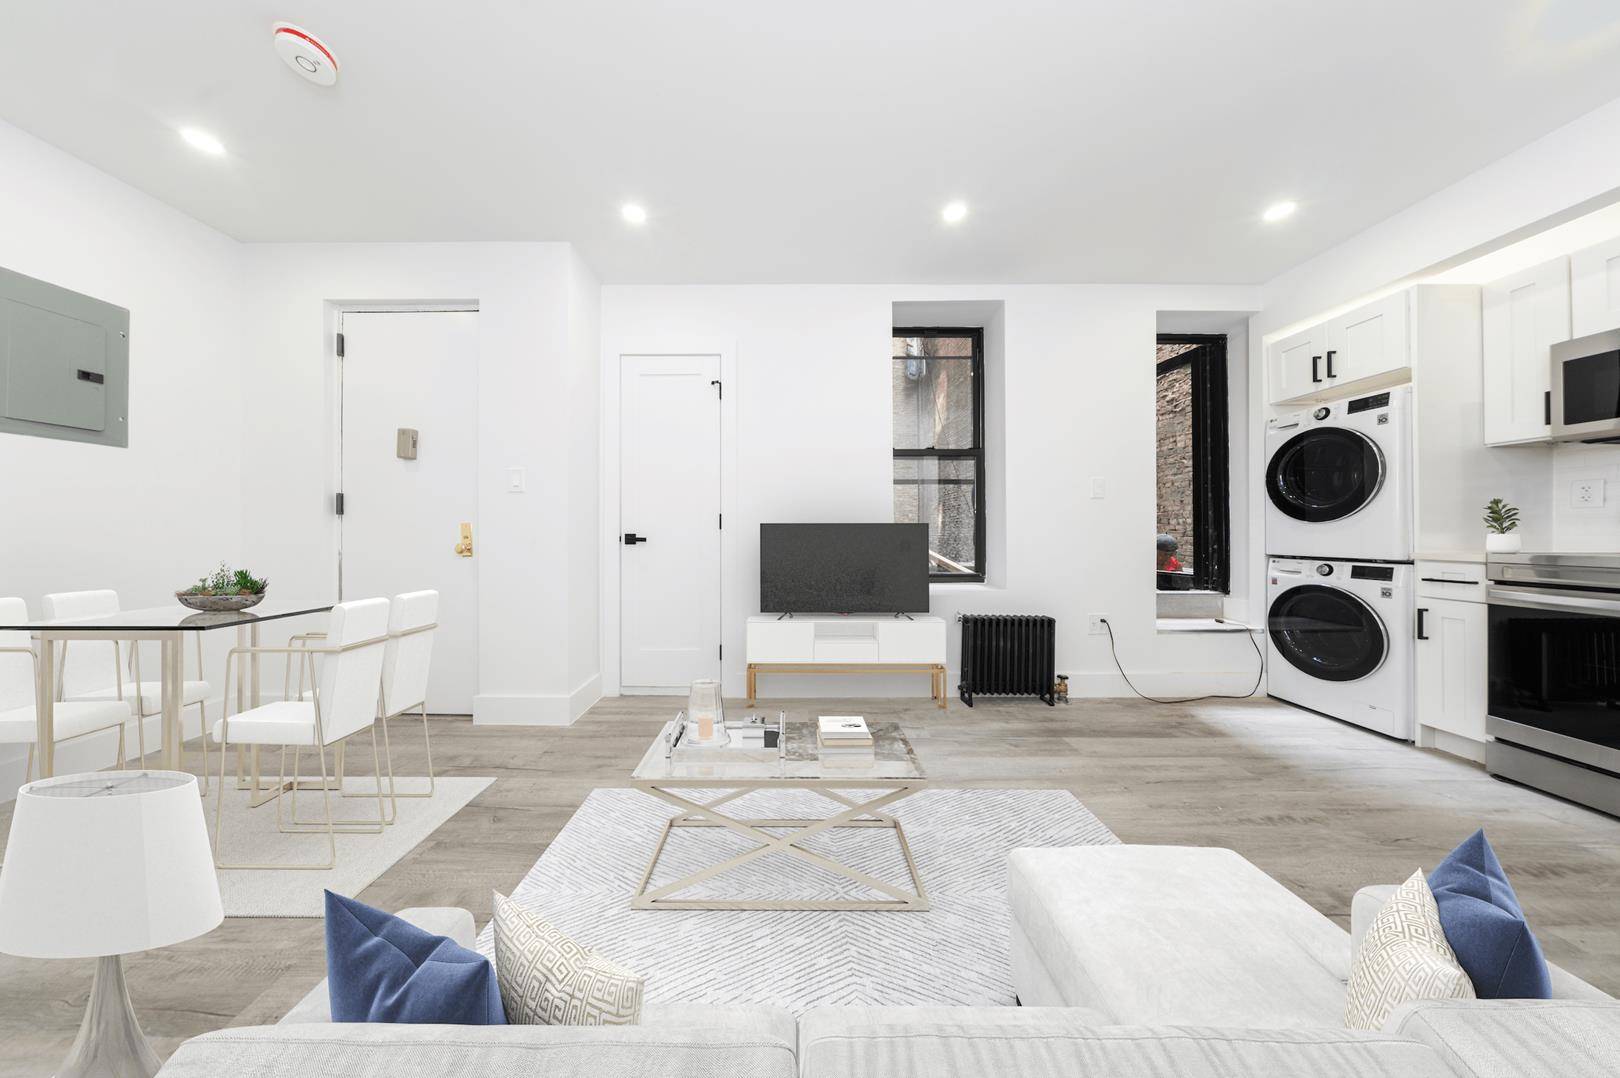 Live in this newly renovated 3 bedroom 2 bath apartment that is complete with wide grain, matte finish hardwood floors, in unit washer dryer, and a private patio !